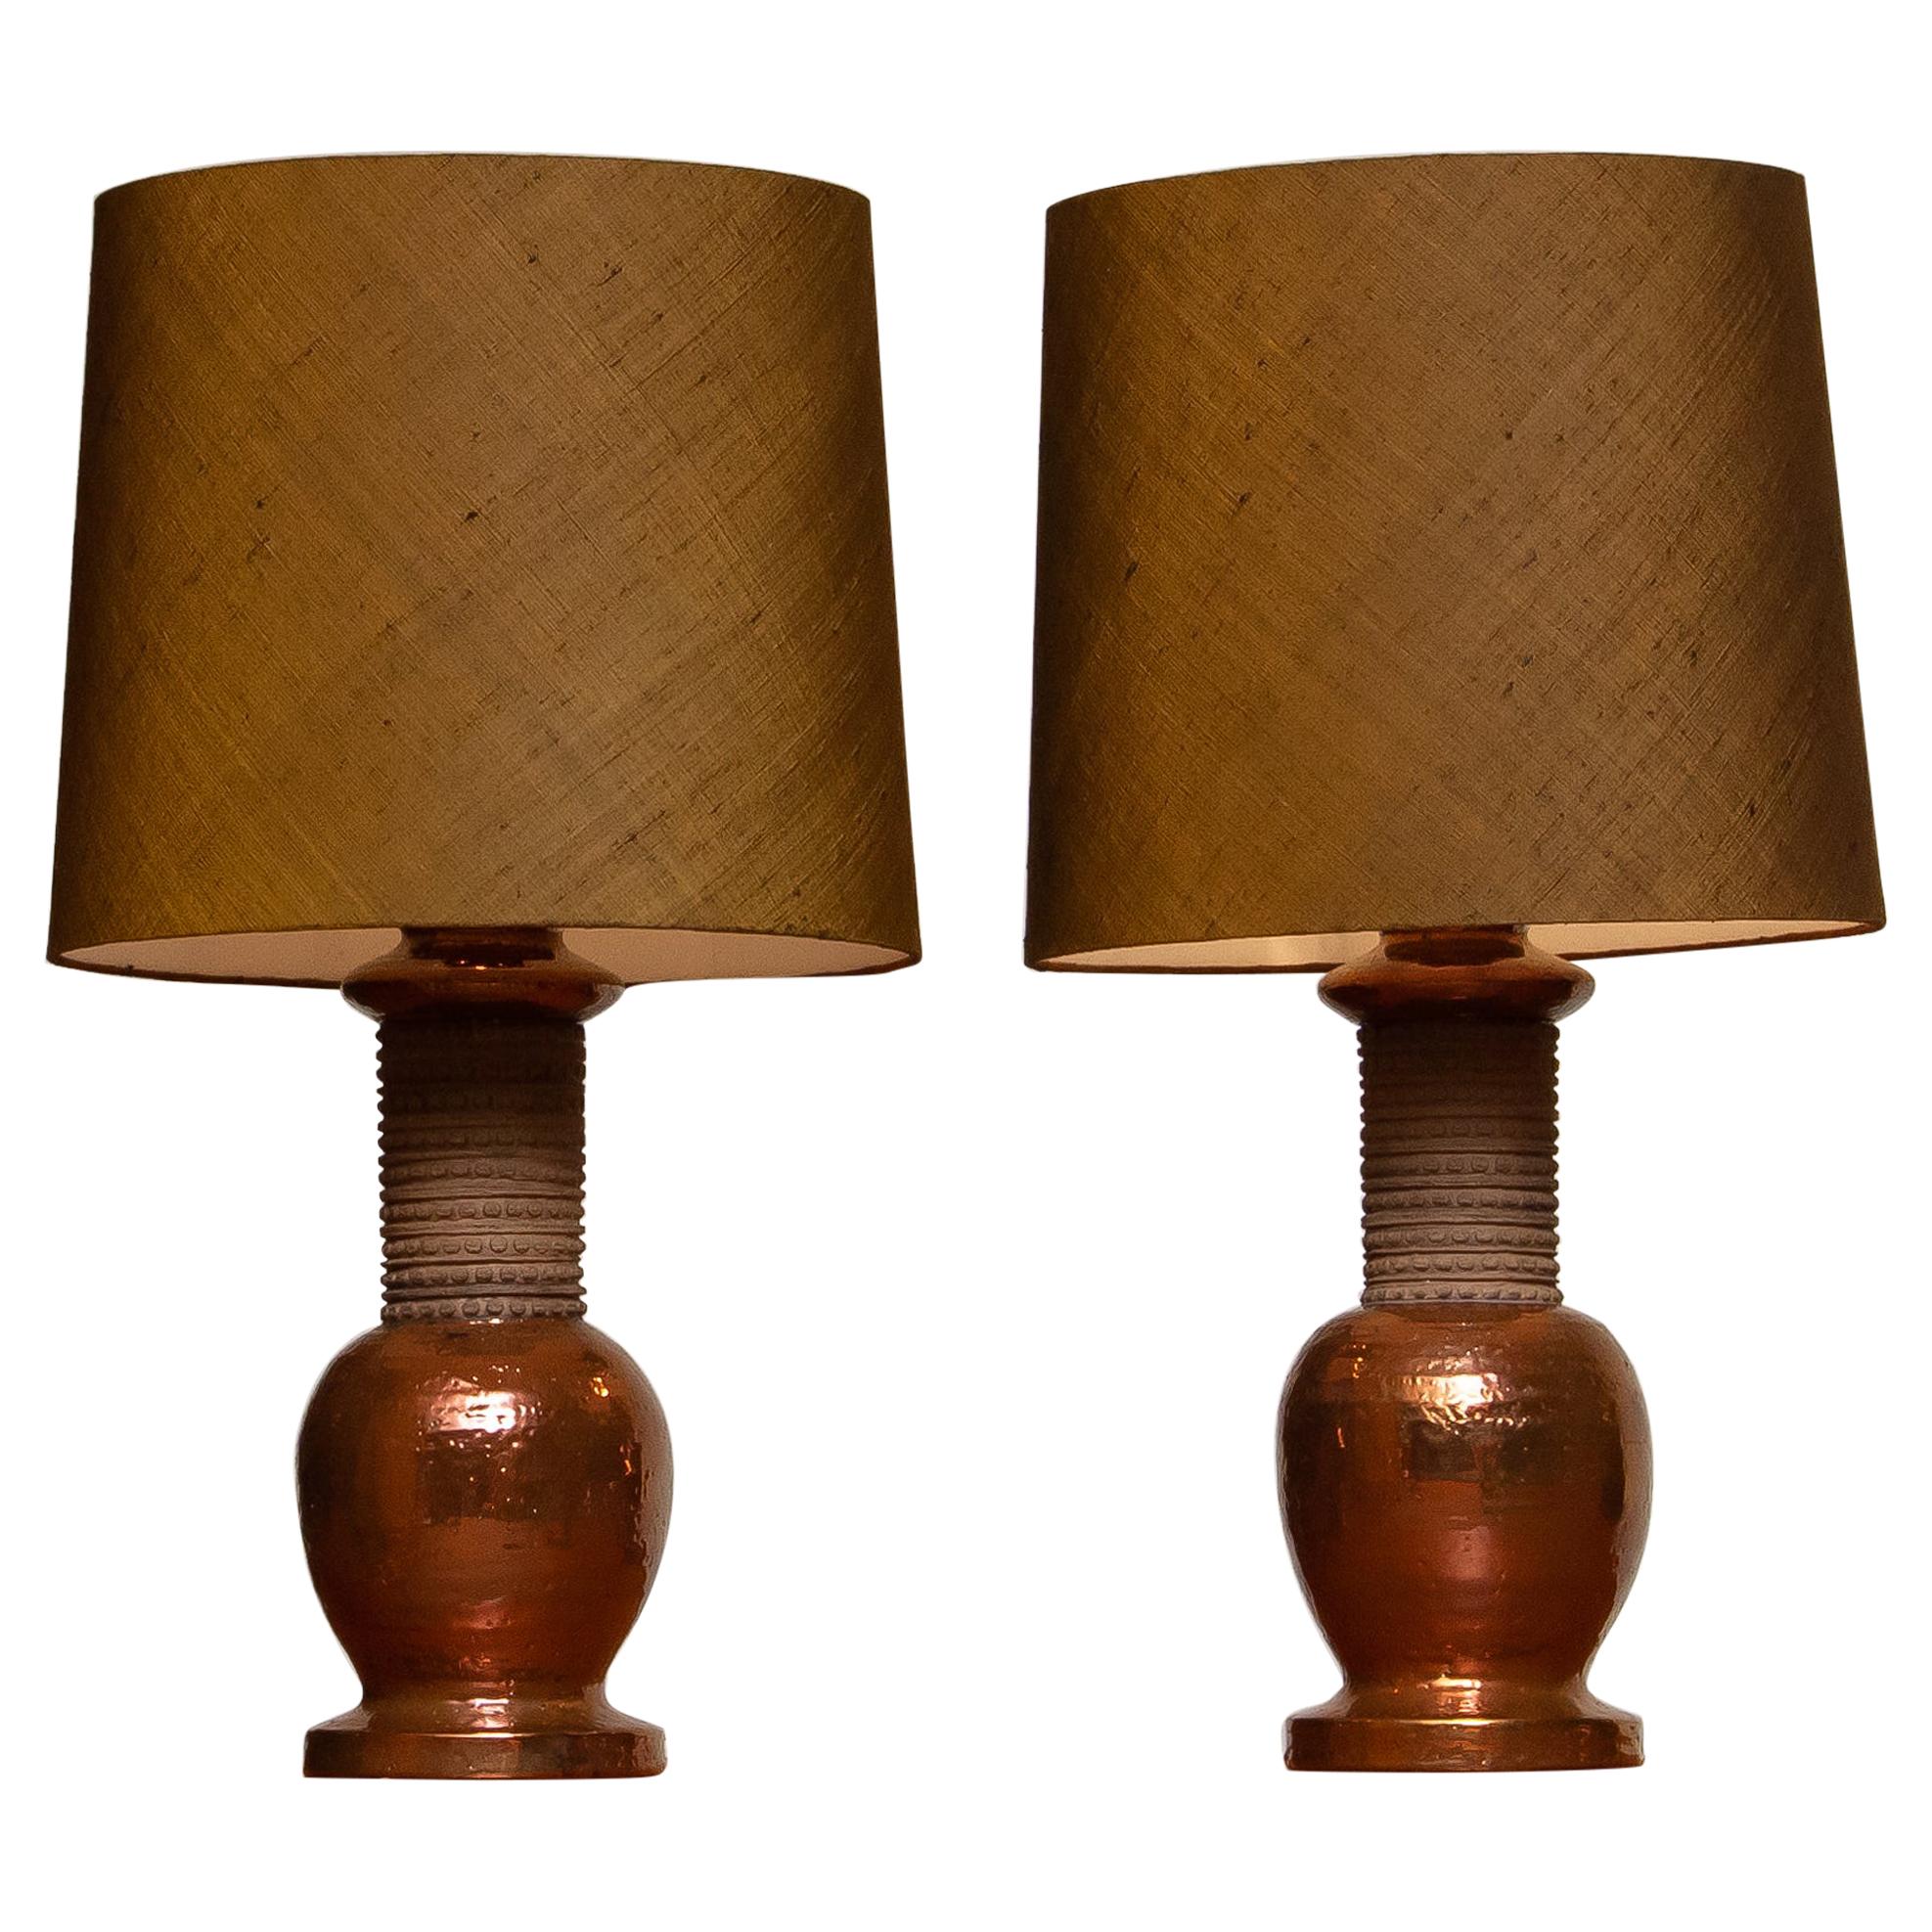 1960s, Pair of Ceramic and Copper Bitossi Italy Table Lamps for Bergboms Sweden